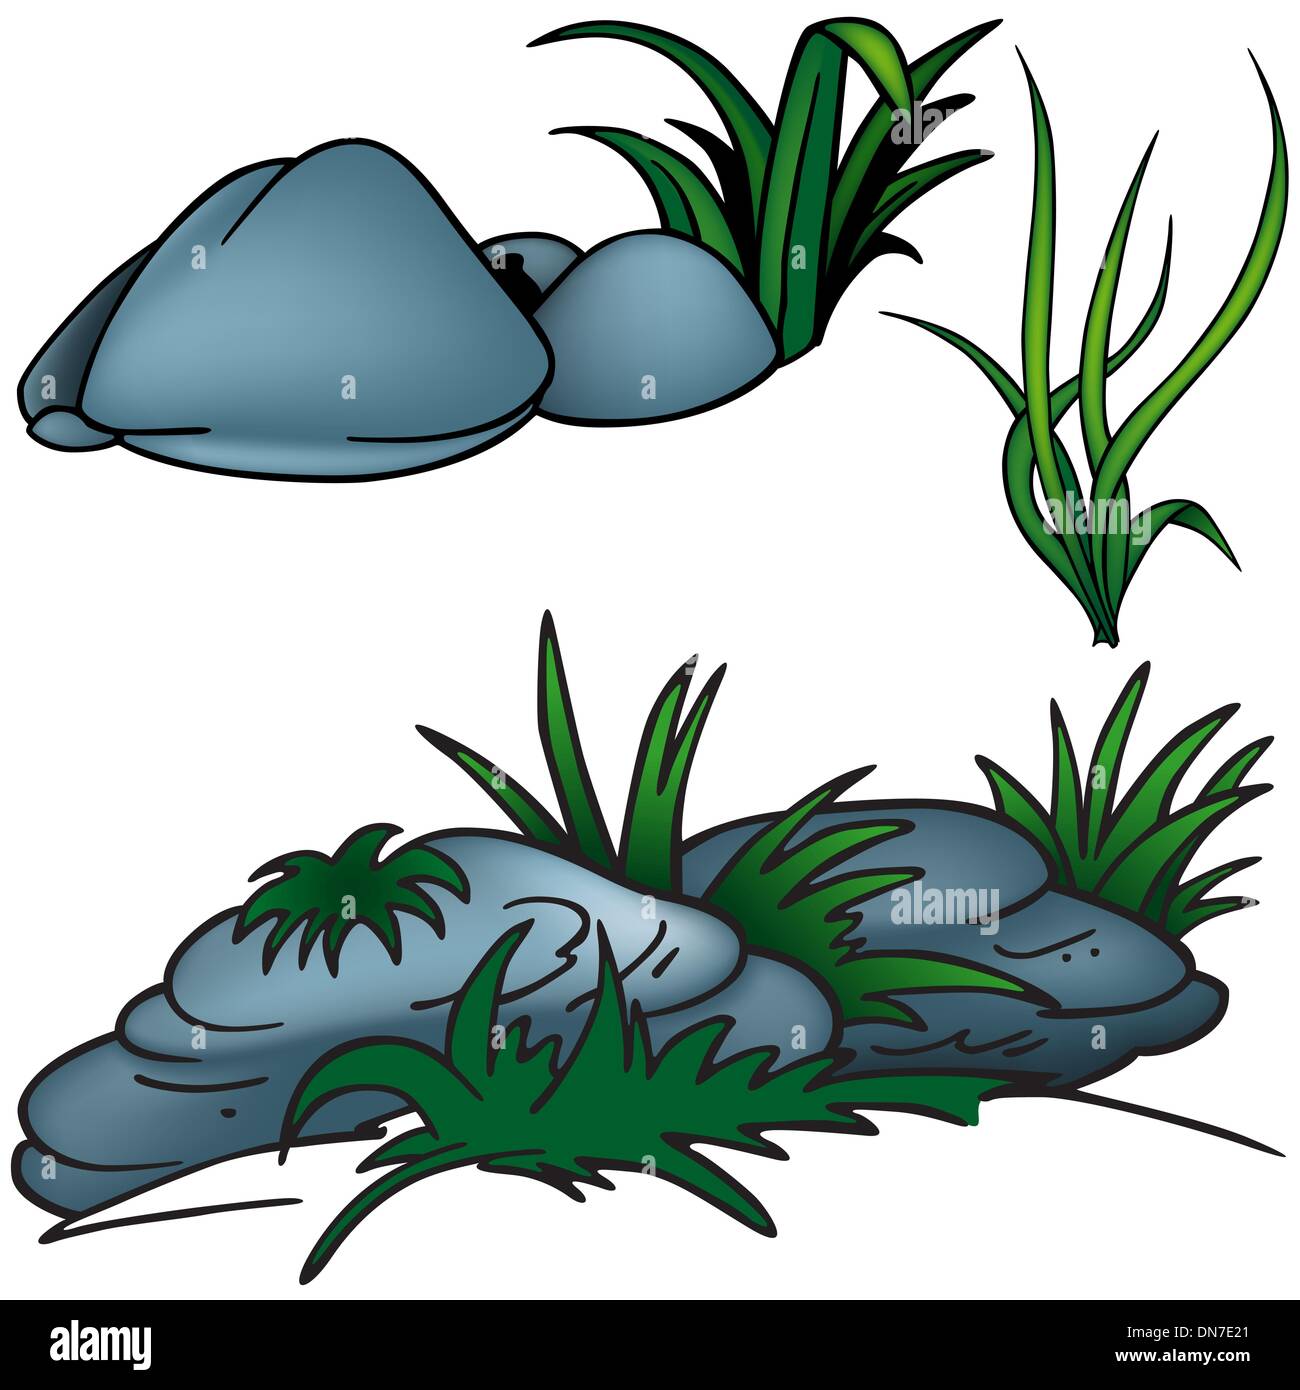 Grass And Rocks Stock Vector